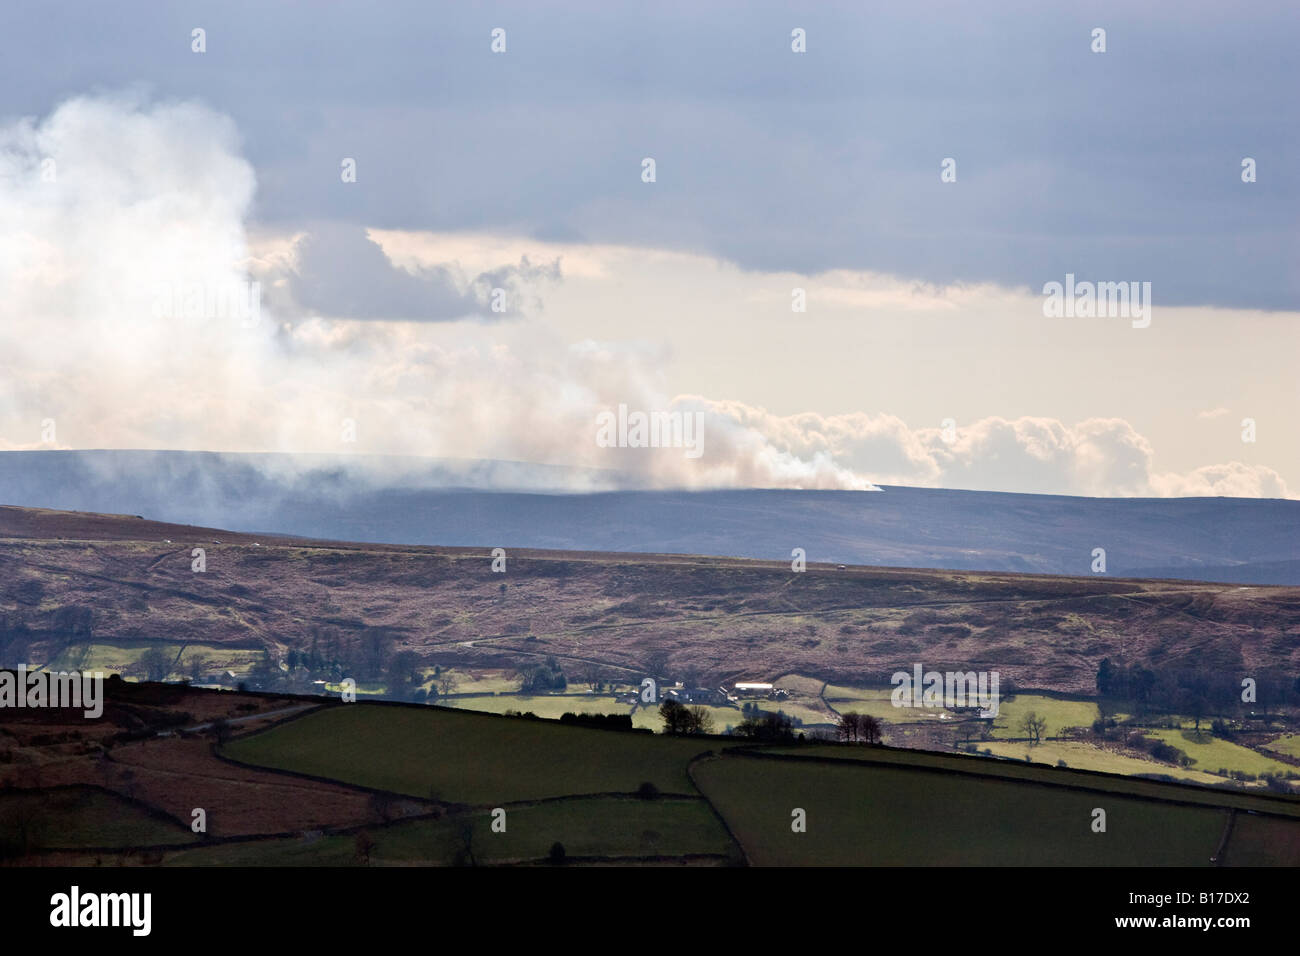 Burning heather in the North York Moors National Park near Danby. UK Stock Photo